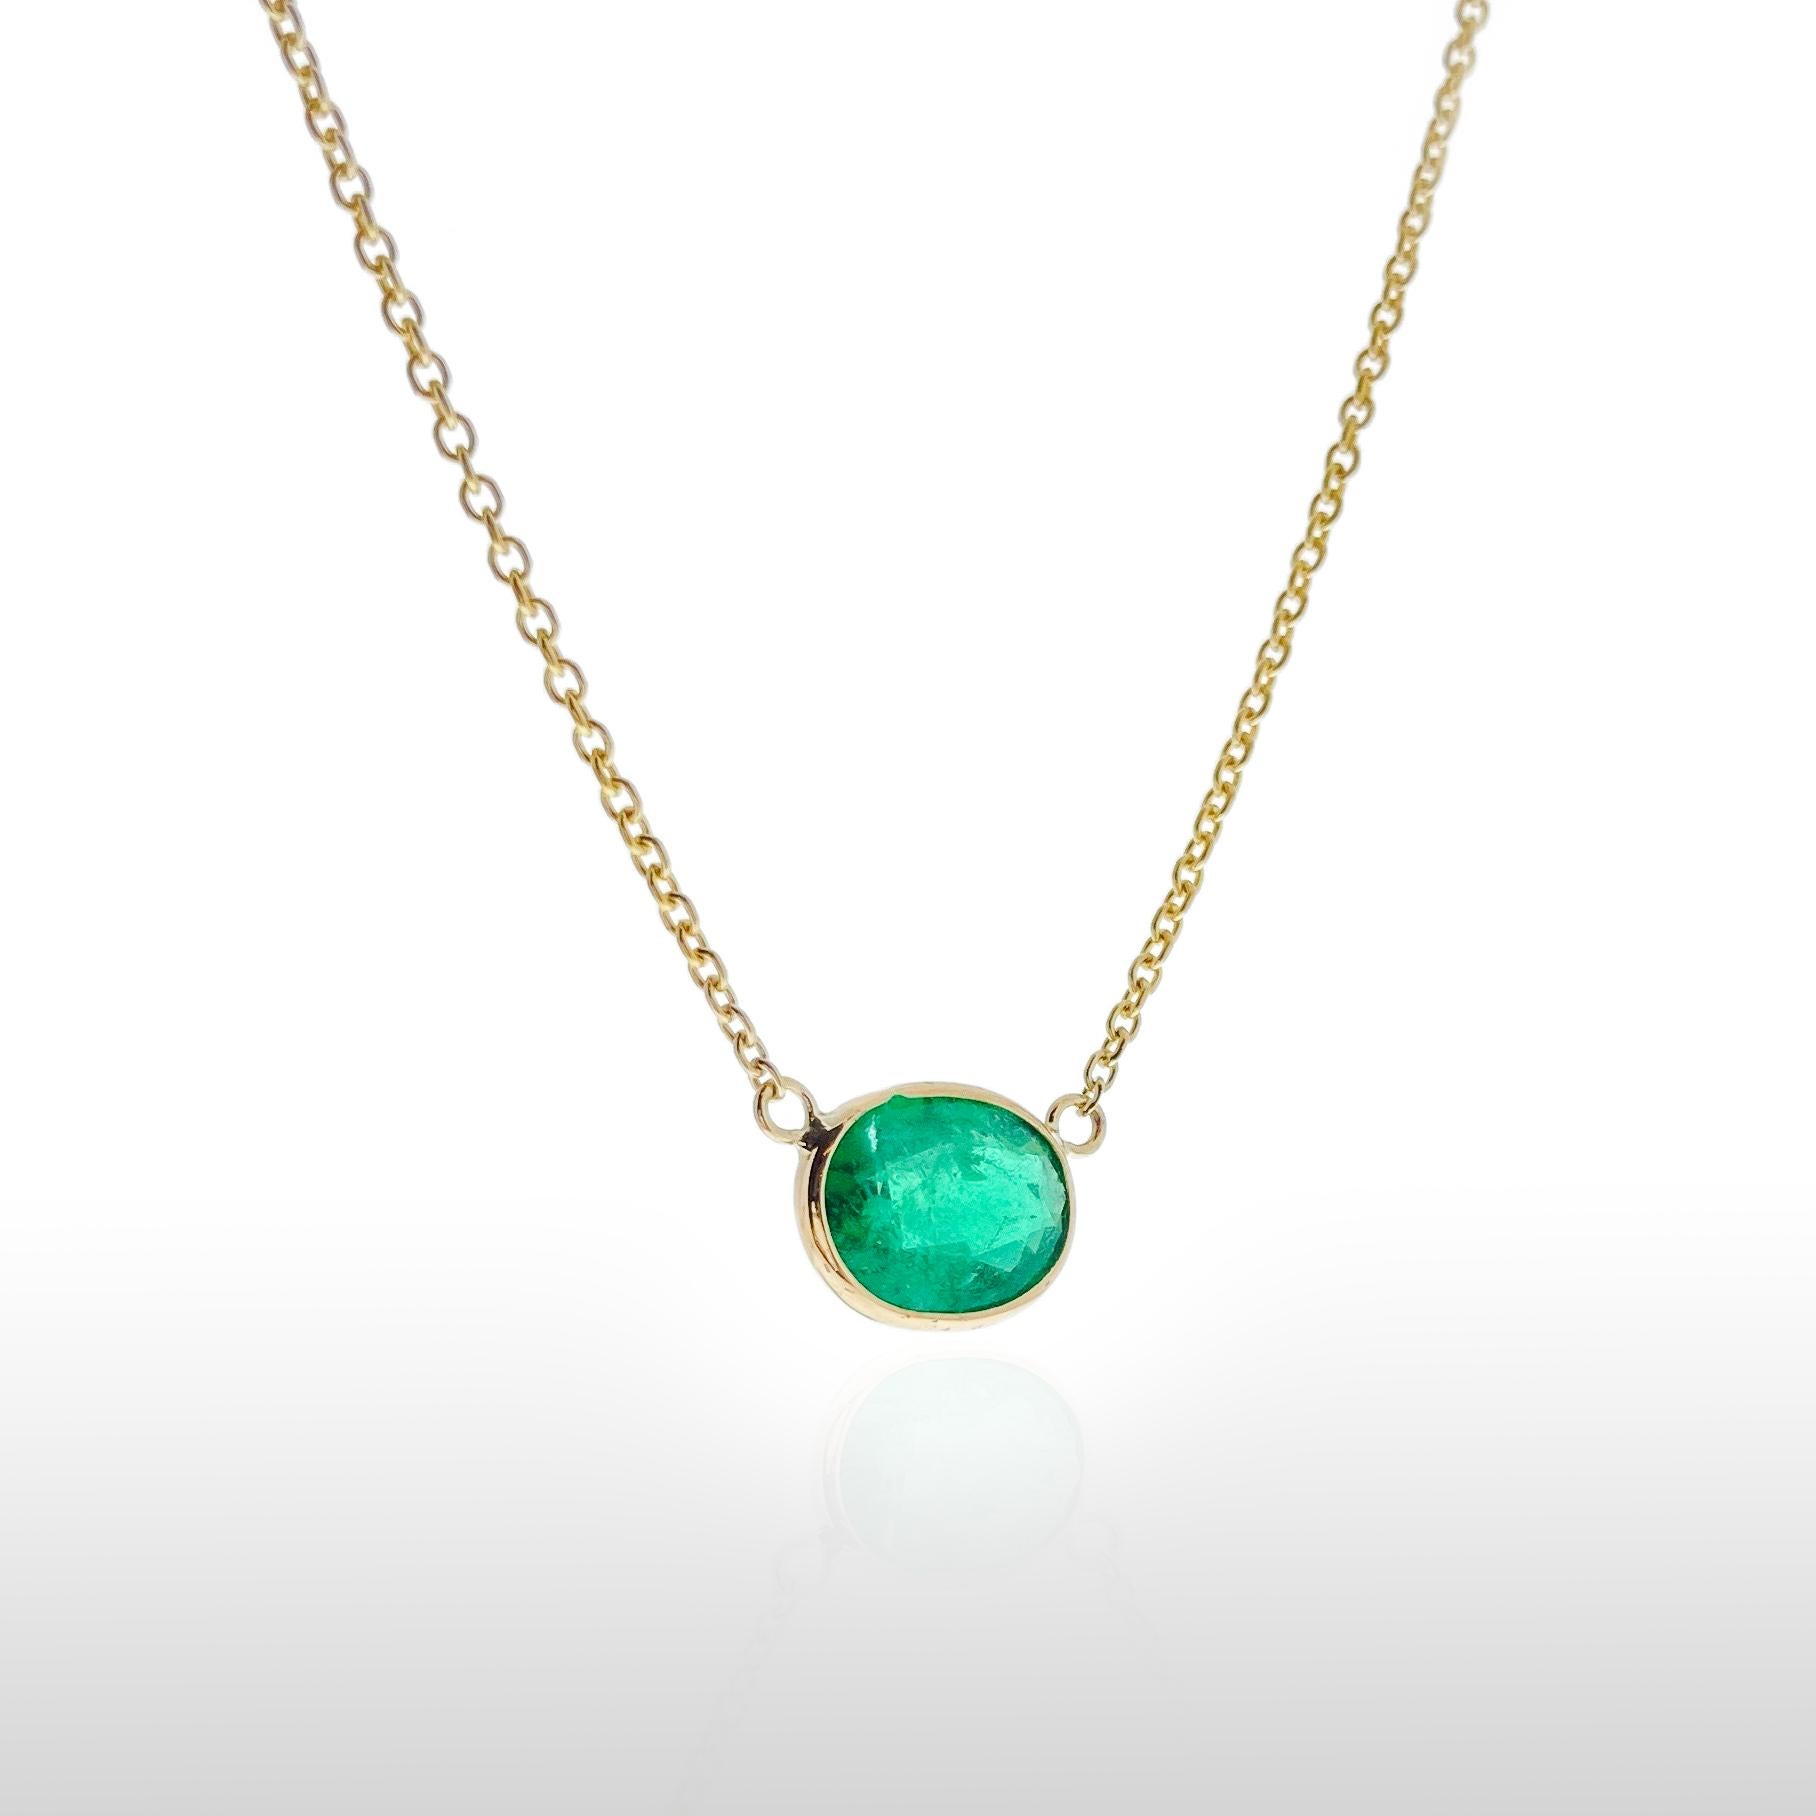 This necklace features a pear-cut green emerald with a weight of 1.92 carats, set in 14k yellow gold (YG). Emeralds are highly valued for their rich green color, and the pear cut, with its distinctive teardrop shape, adds an elegant and unique touch